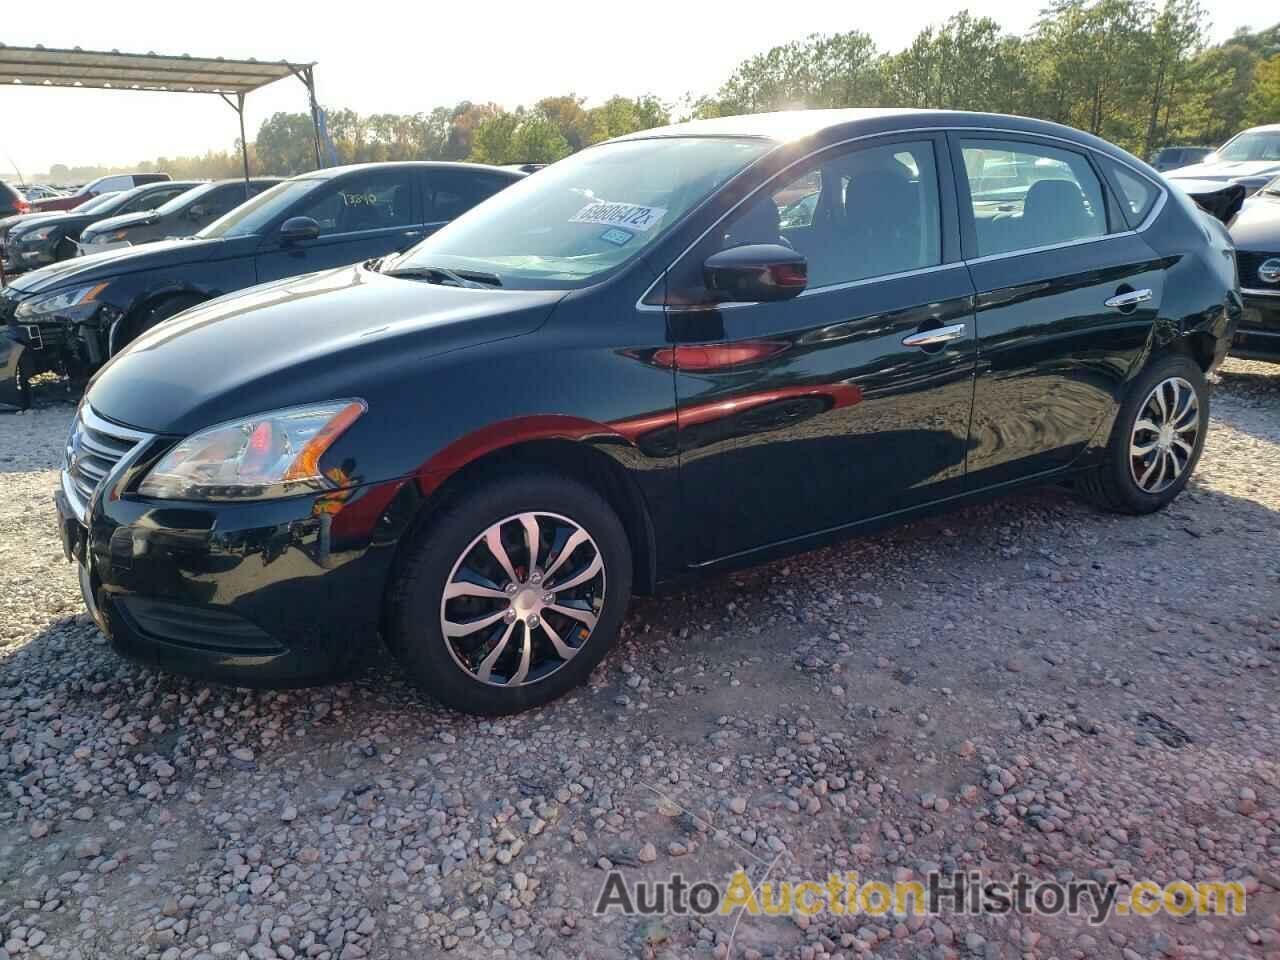 2014 NISSAN SENTRA S, 3N1AB7APXEY208602